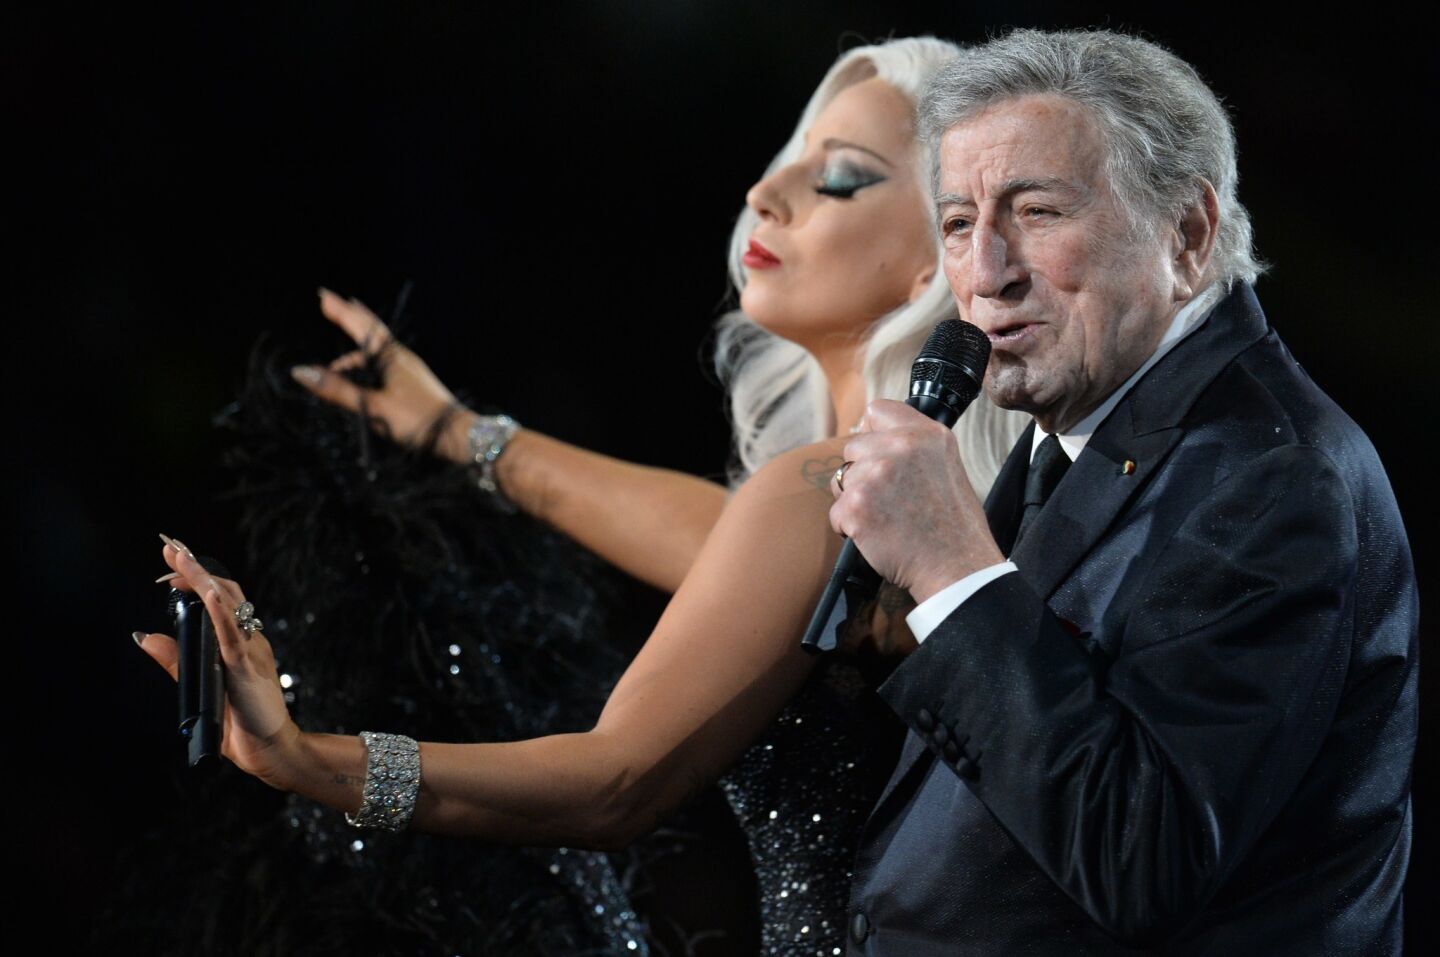 Lady Gaga and Tony Bennett show how it's done